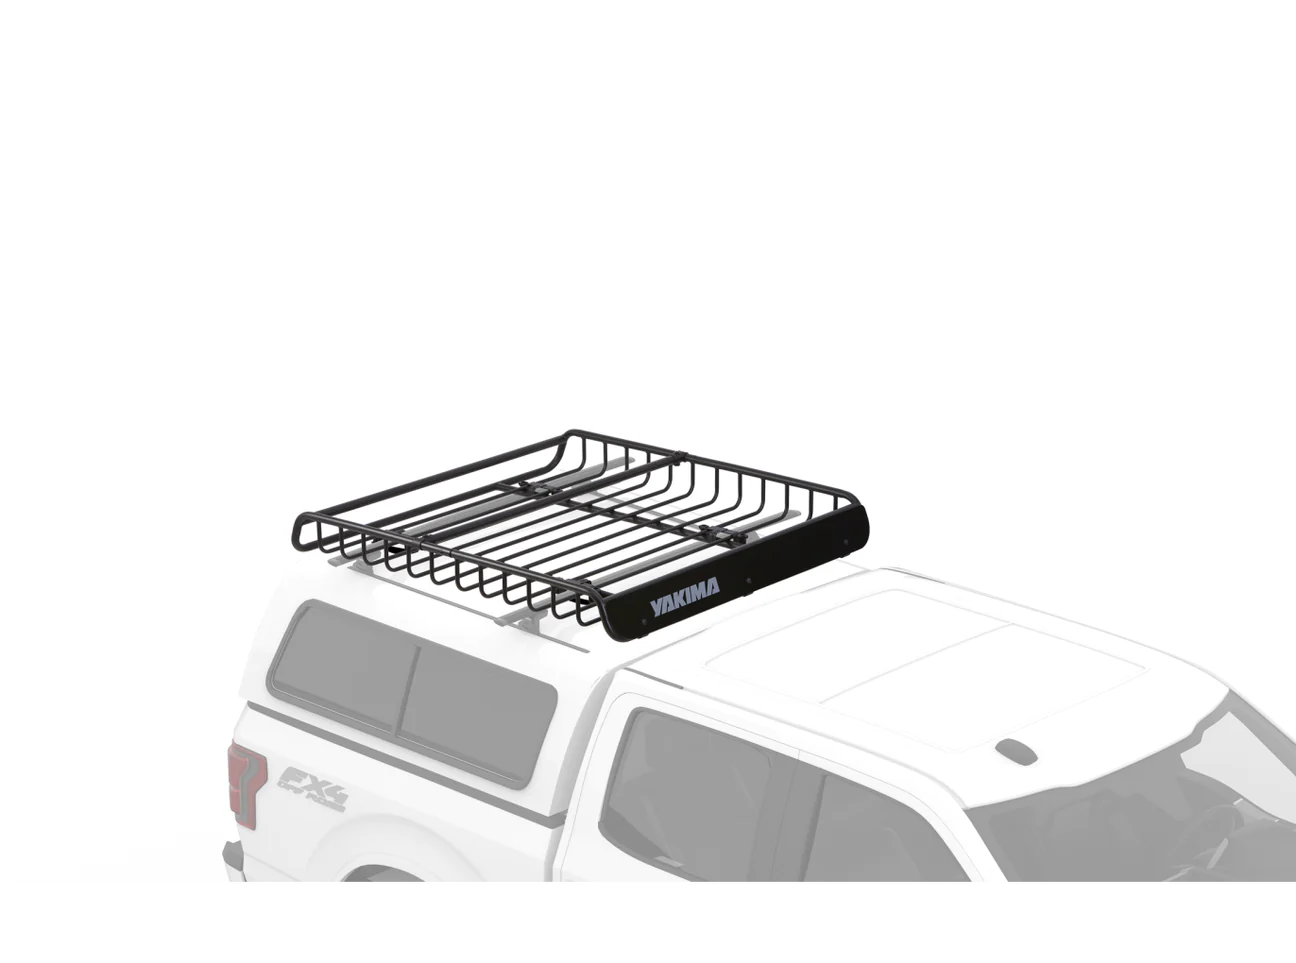 A Yakima Mega Warrior roof rack on the top of a truck.